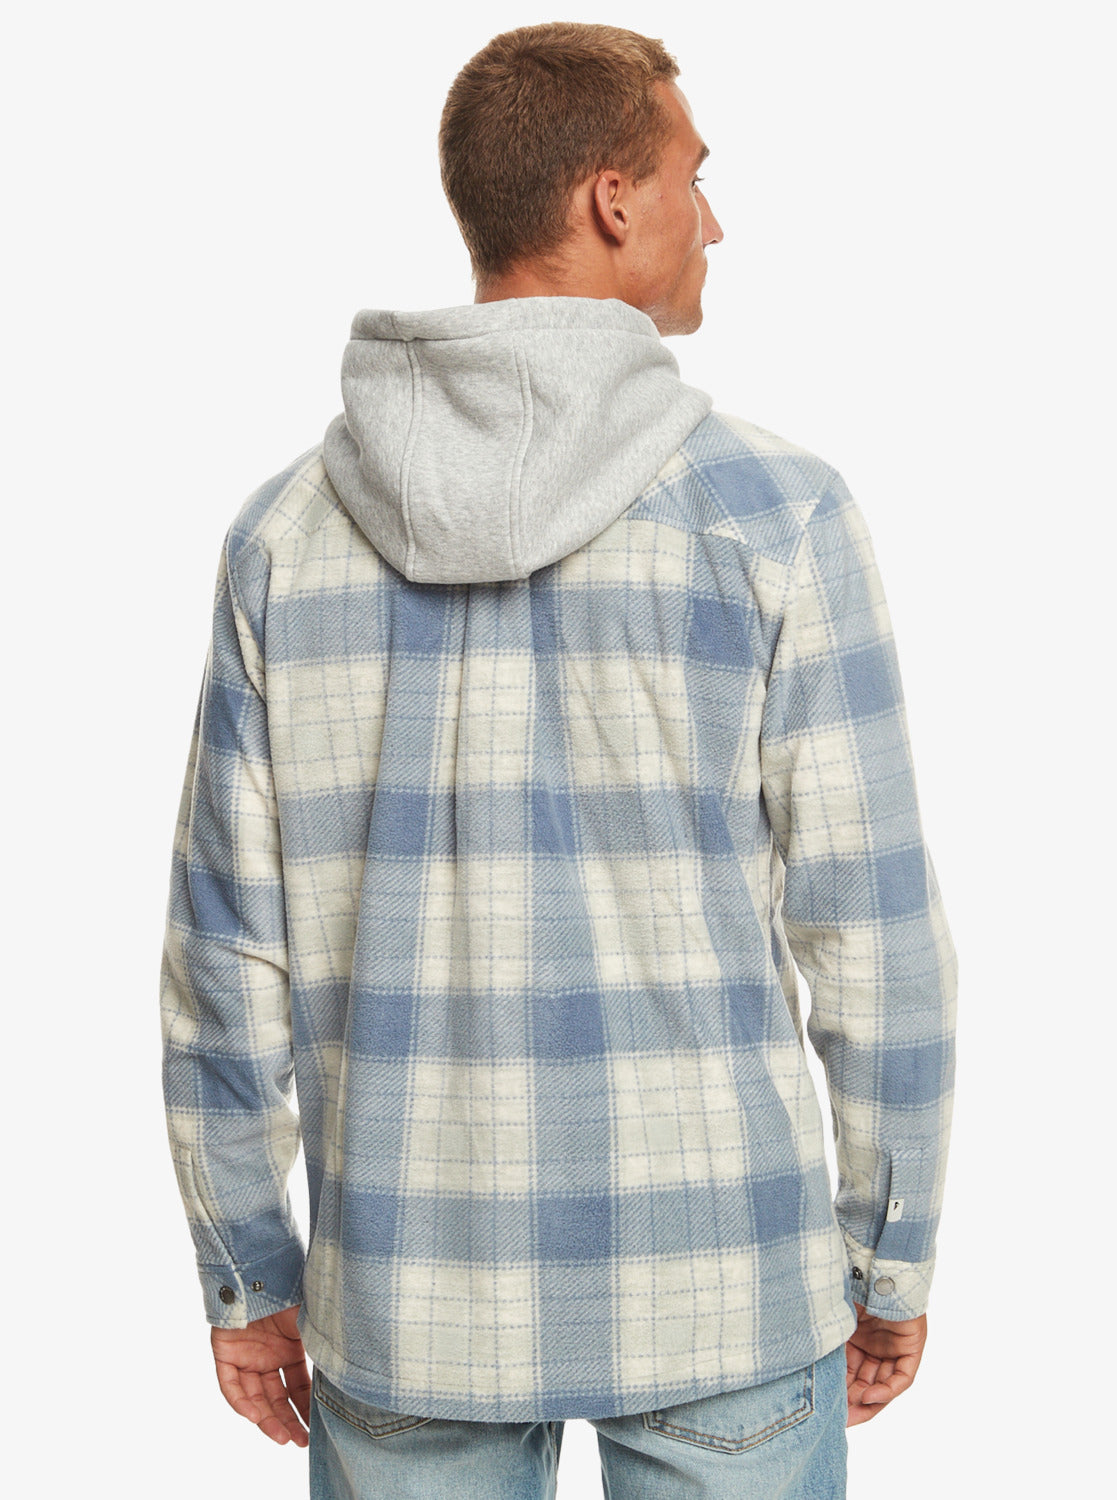 Quiksilver Super Swell Zip-Up Hoodie - Bering Sea Superswell Plaid